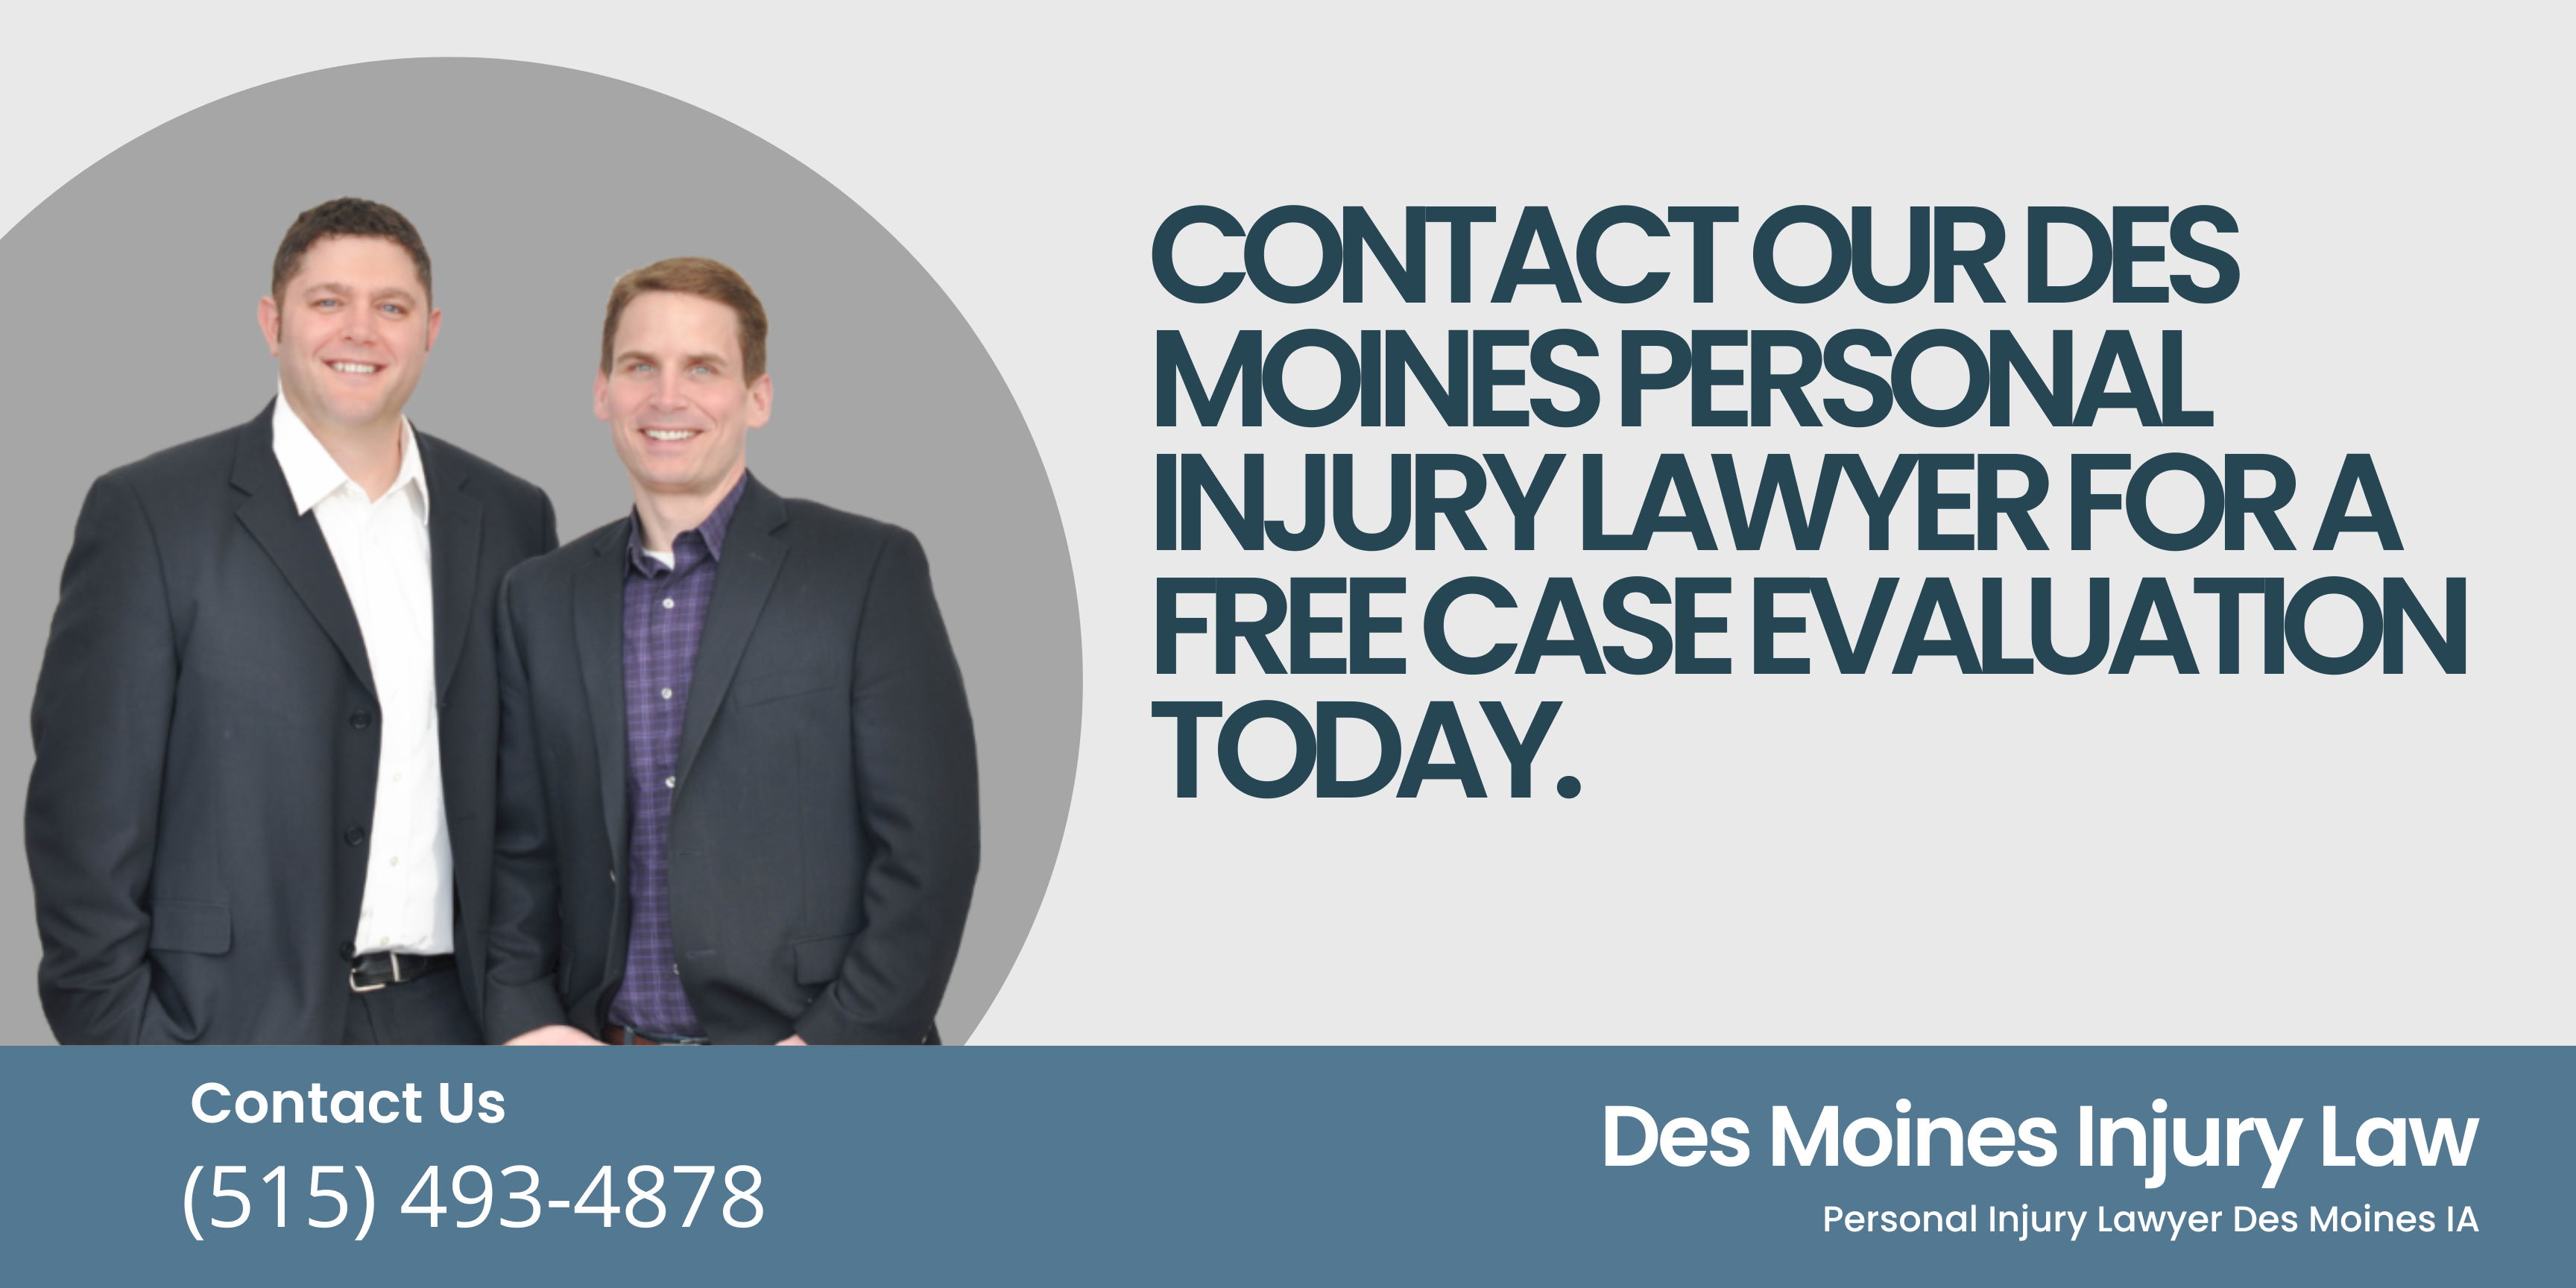 Contact our Des Moines Personal Injury Lawyer